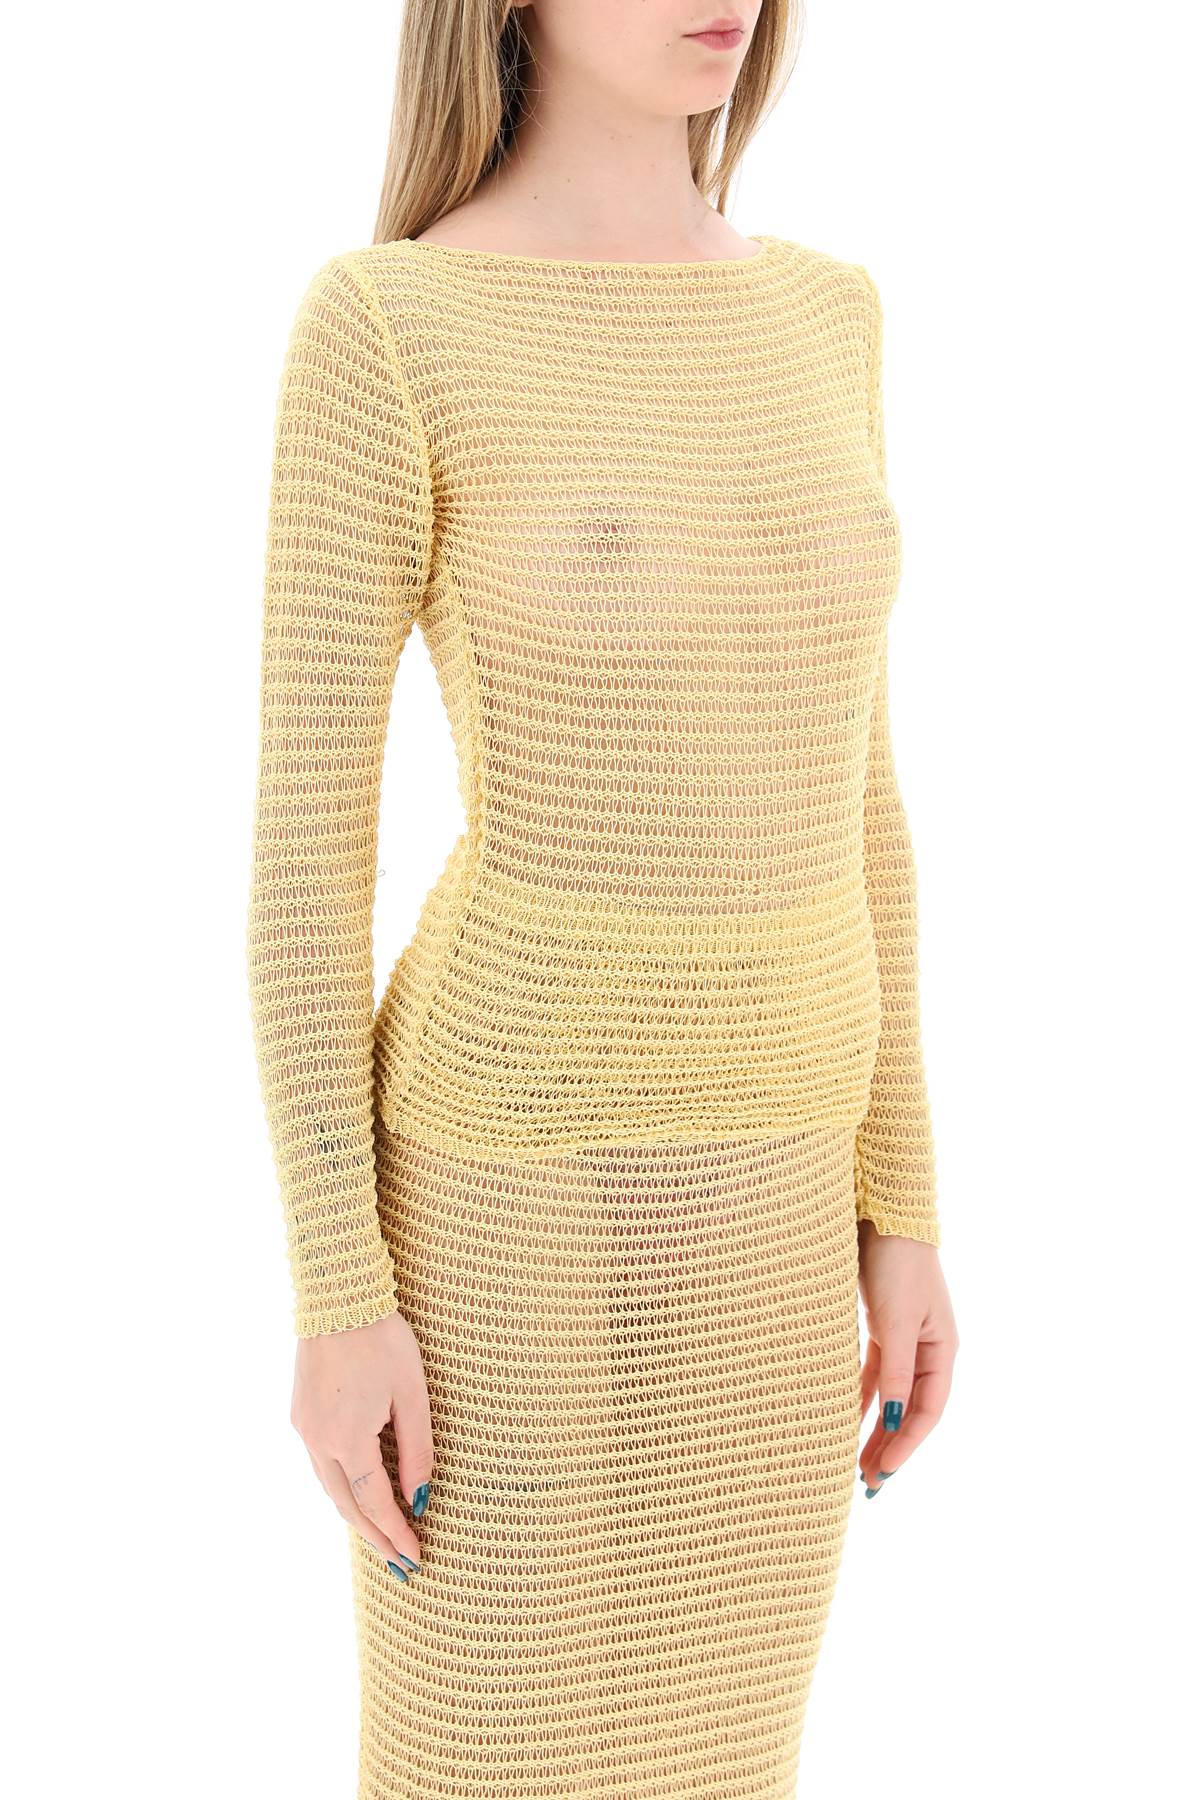 "taxi mesh perforated-1